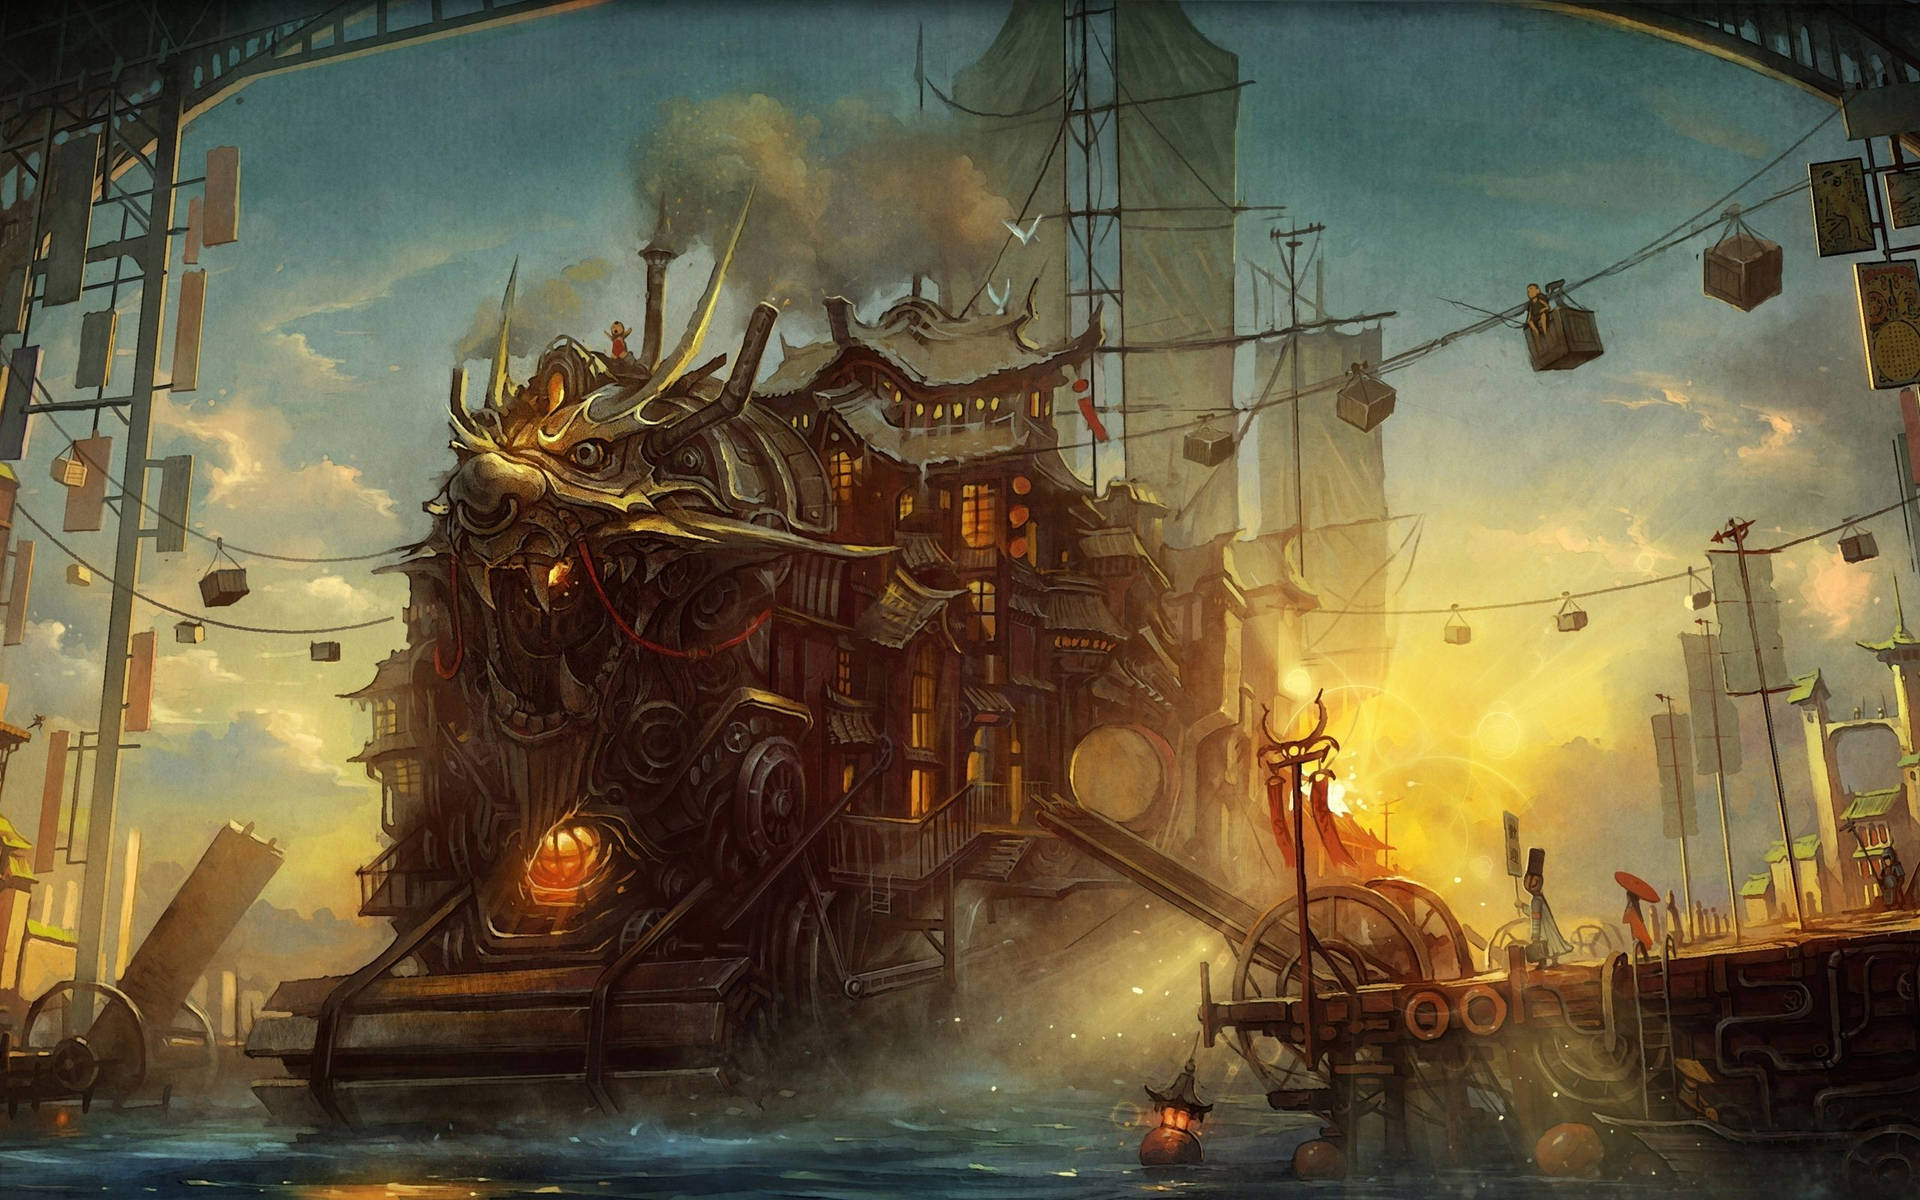 Discover The Next Adventure Aboard a Steampunk Sailing Ship Wallpaper